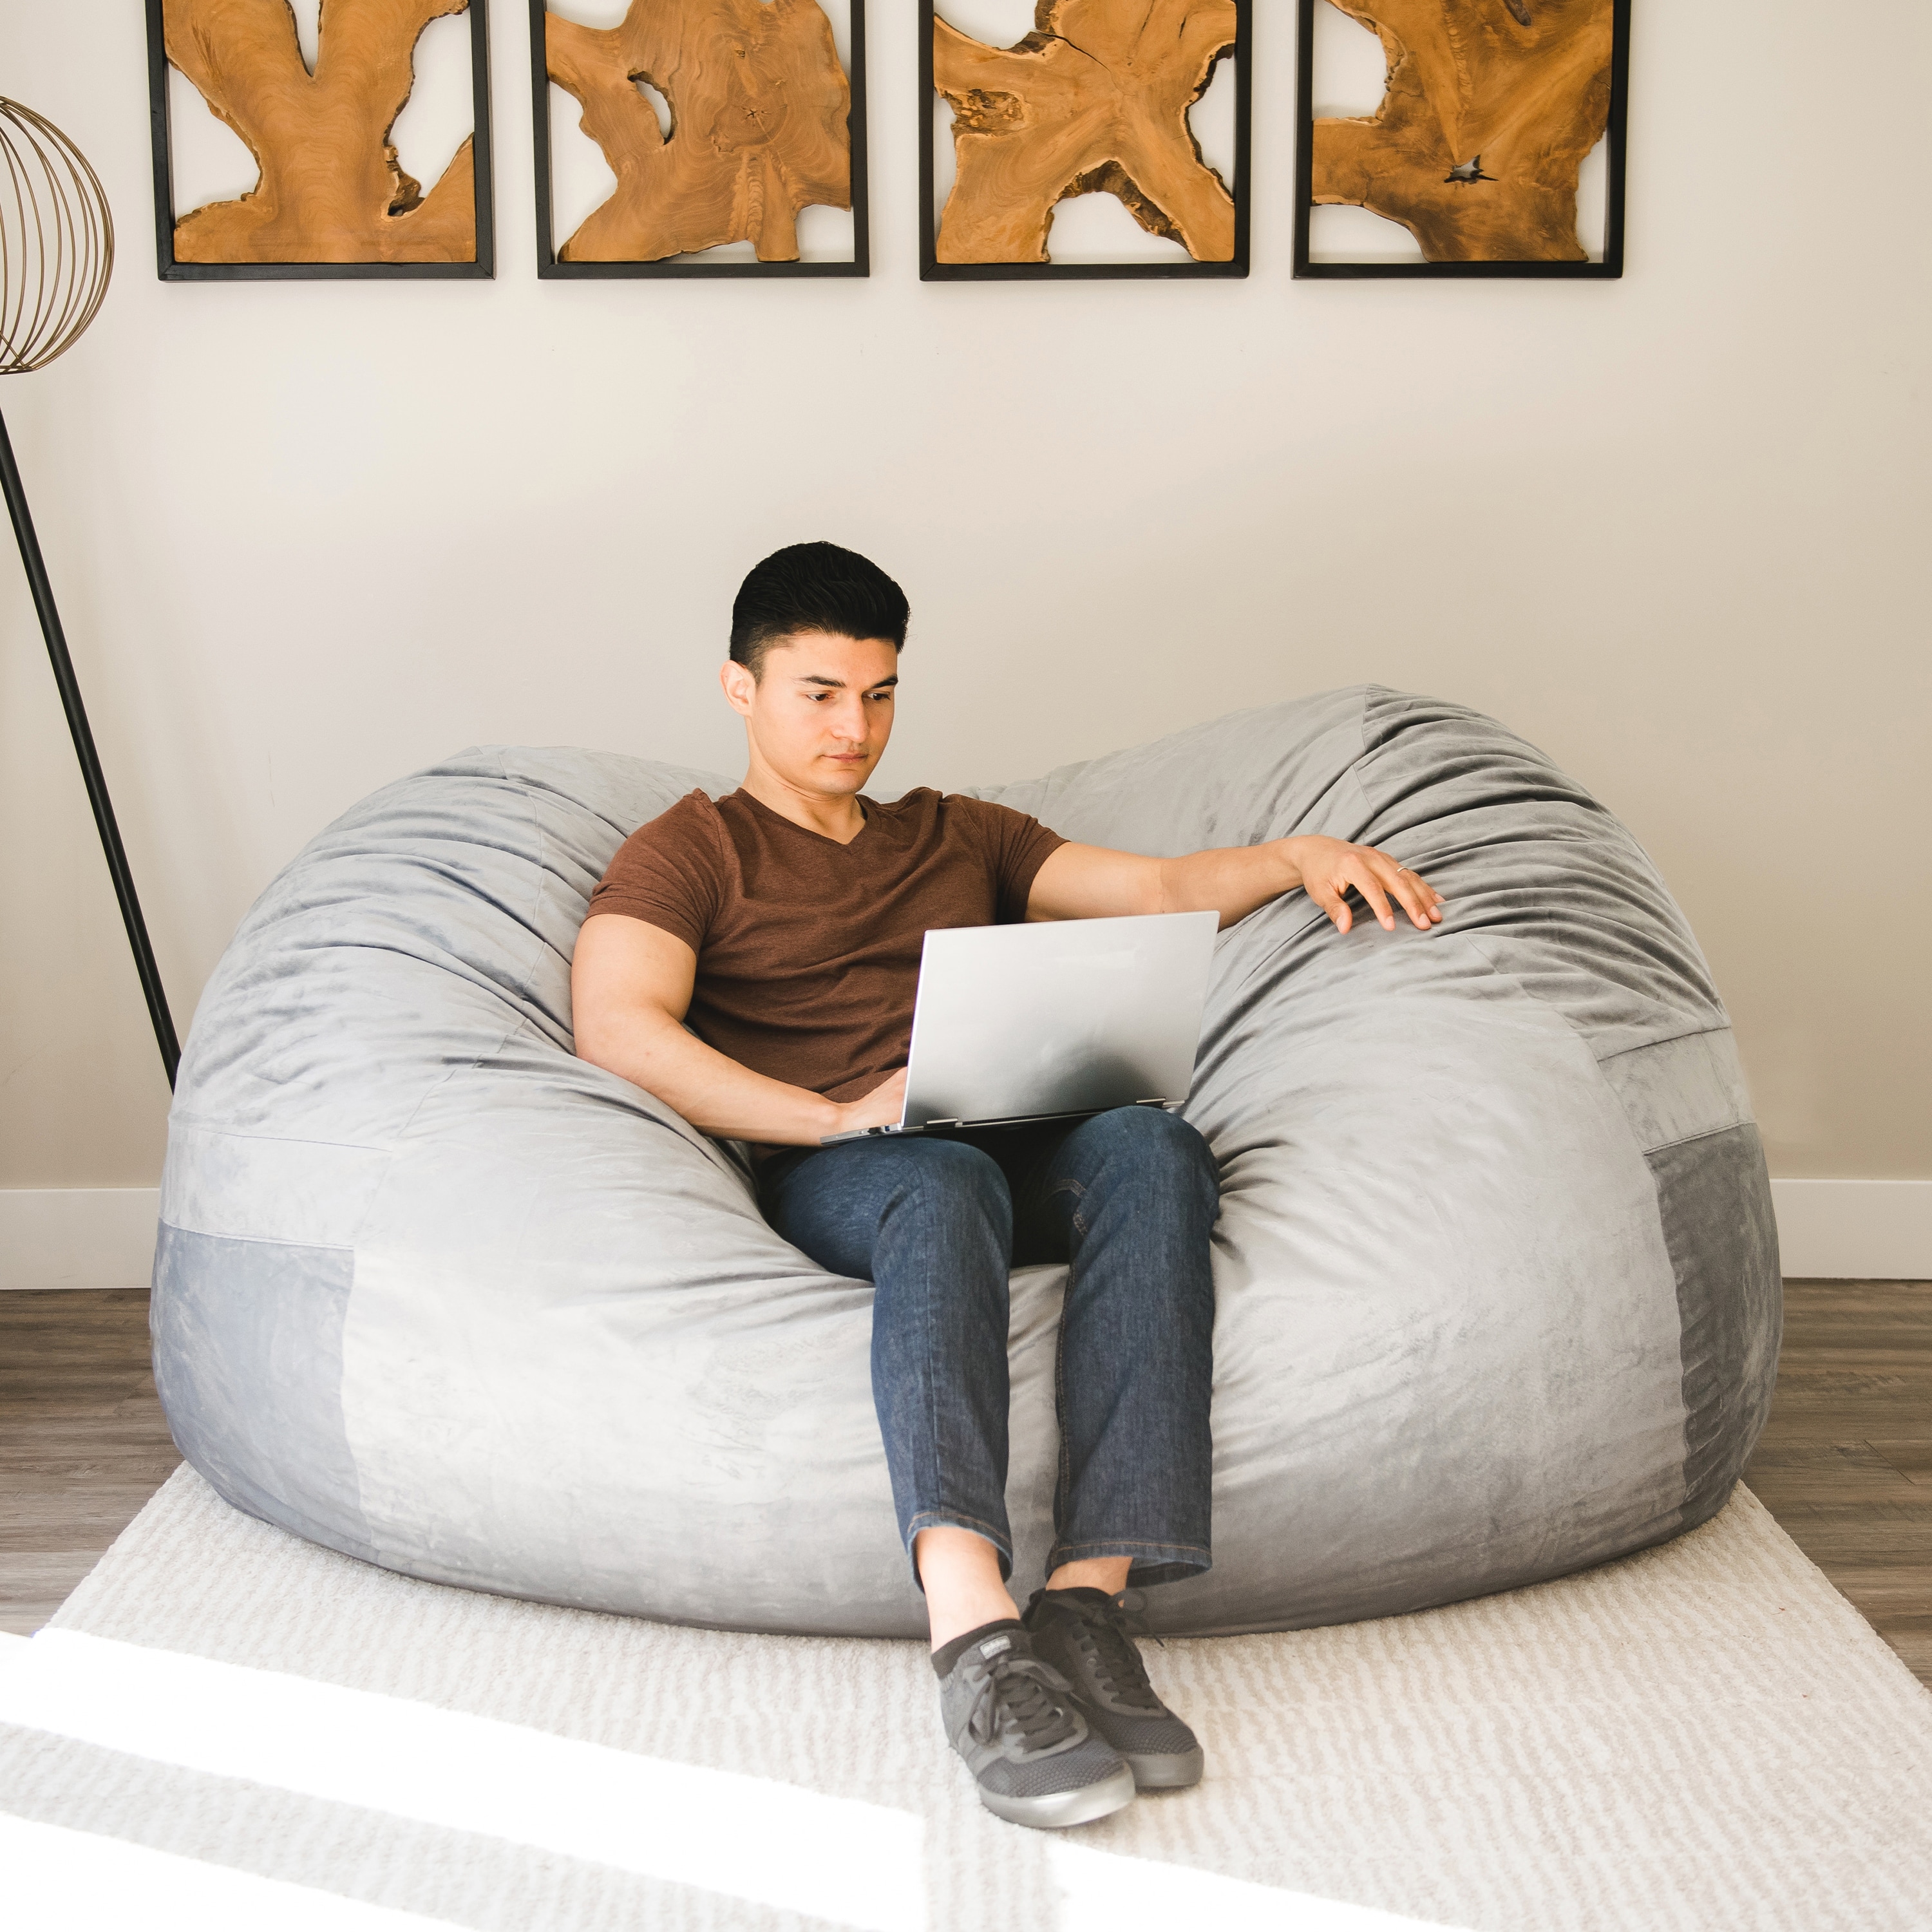 https://ak1.ostkcdn.com/images/products/is/images/direct/c0162680ecb43de4b1d575cfc502bc29d73f2643/Big-Joe-XXL-Fuf-Bean-Bag-Chair-%28Removable-Cover%29.jpg